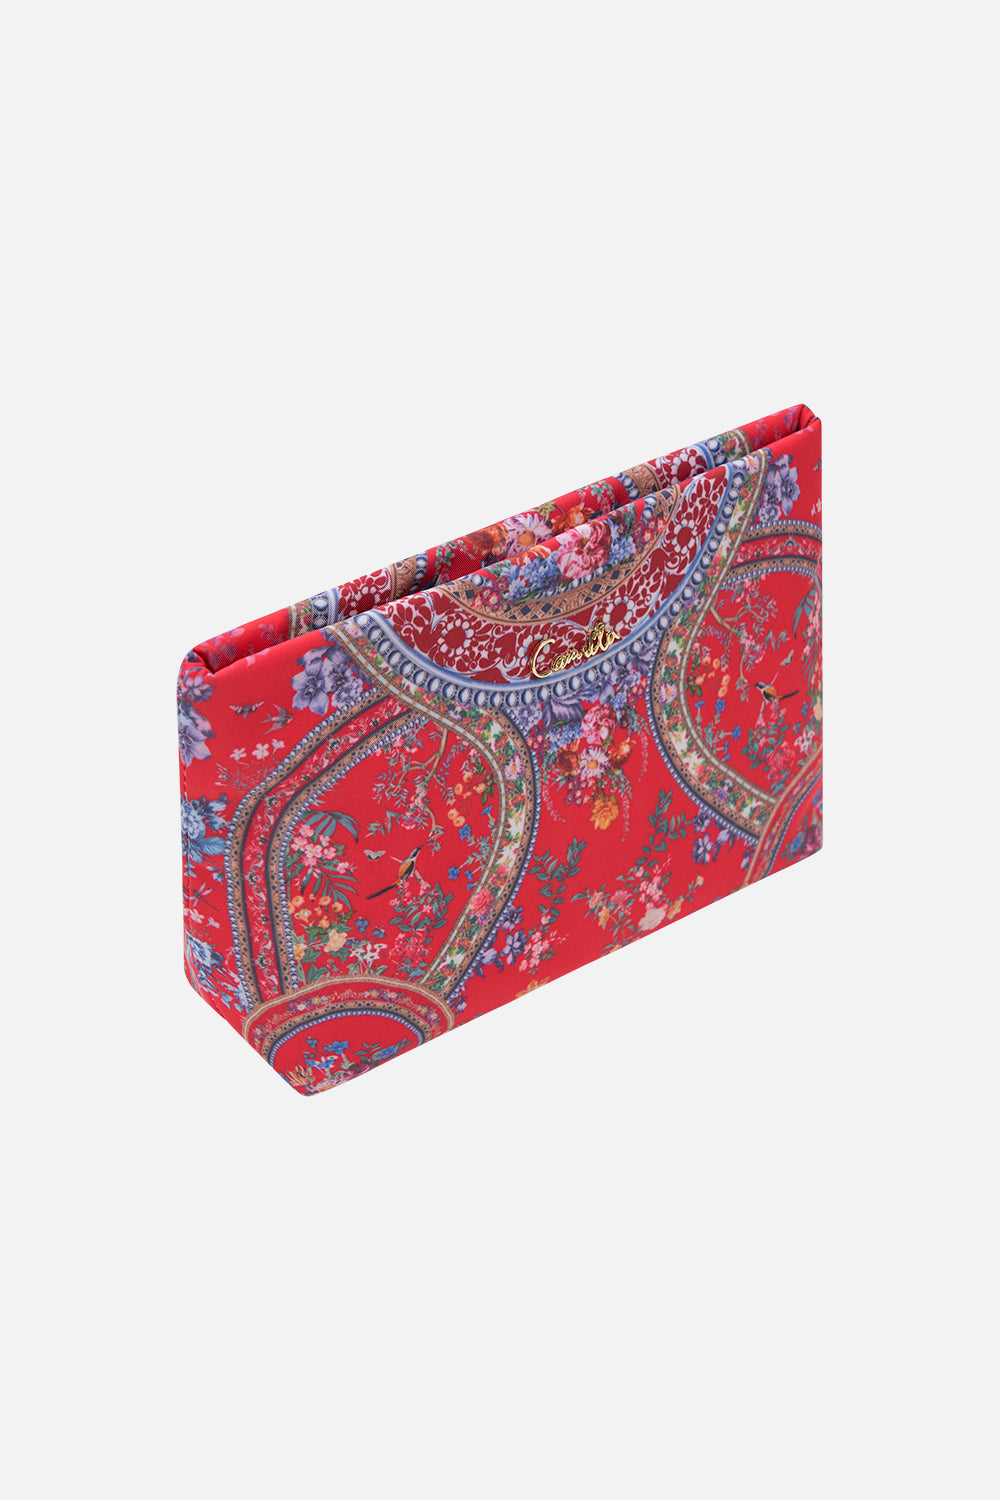 Camilla Small Makeup Clutch - The Summer Palace